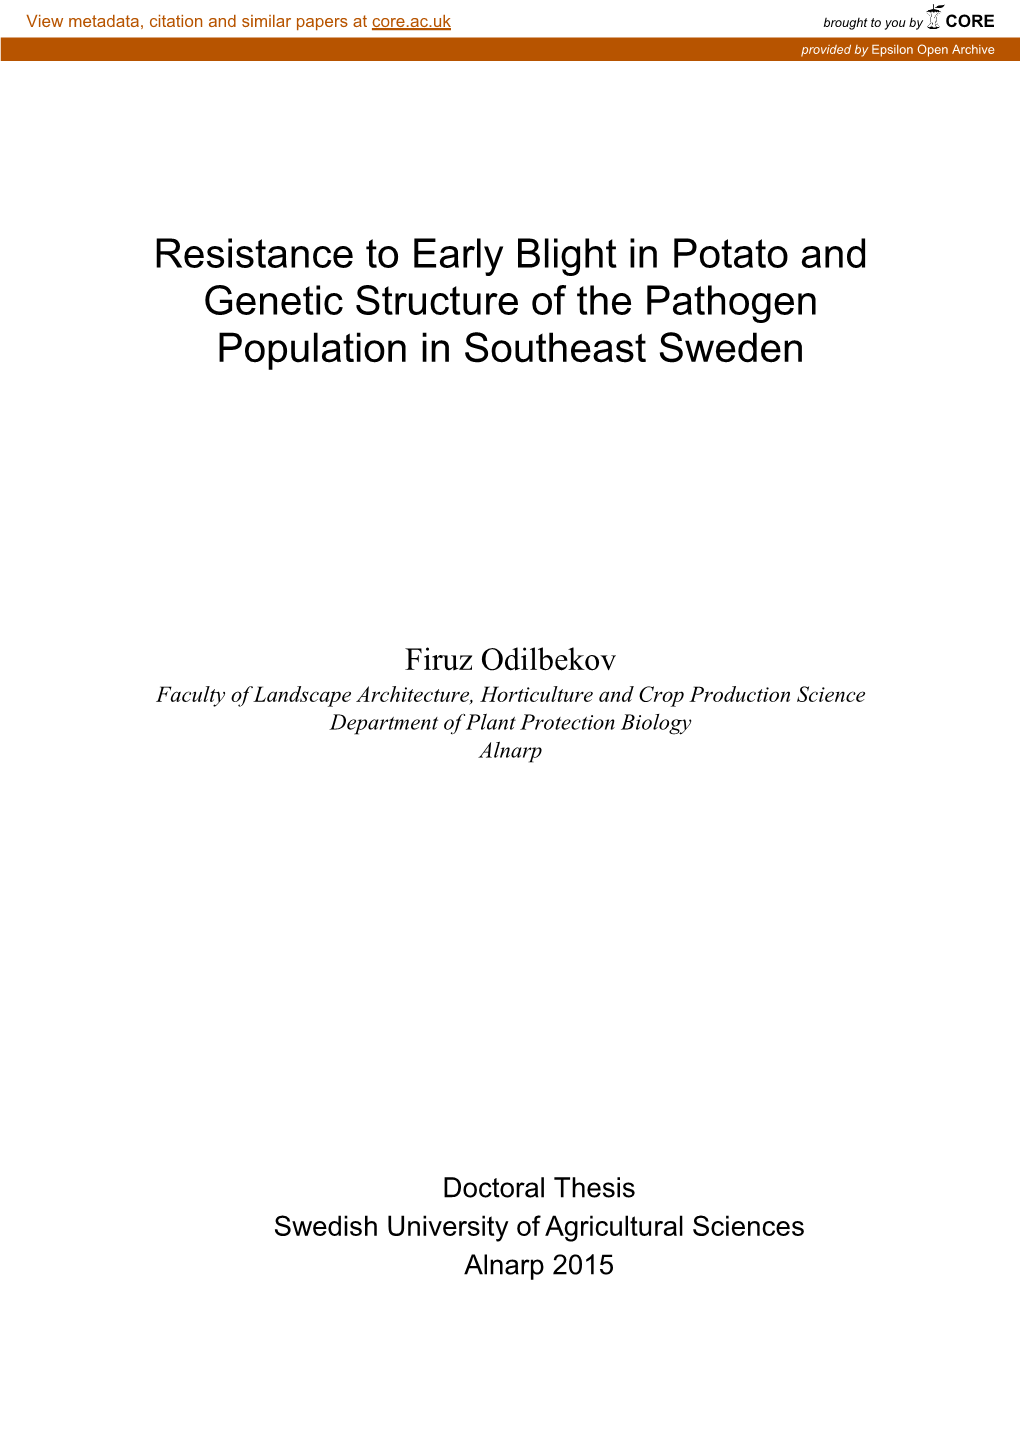 Resistance to Early Blight in Potato and Genetic Structure of the Pathogen Population in Southeast Sweden